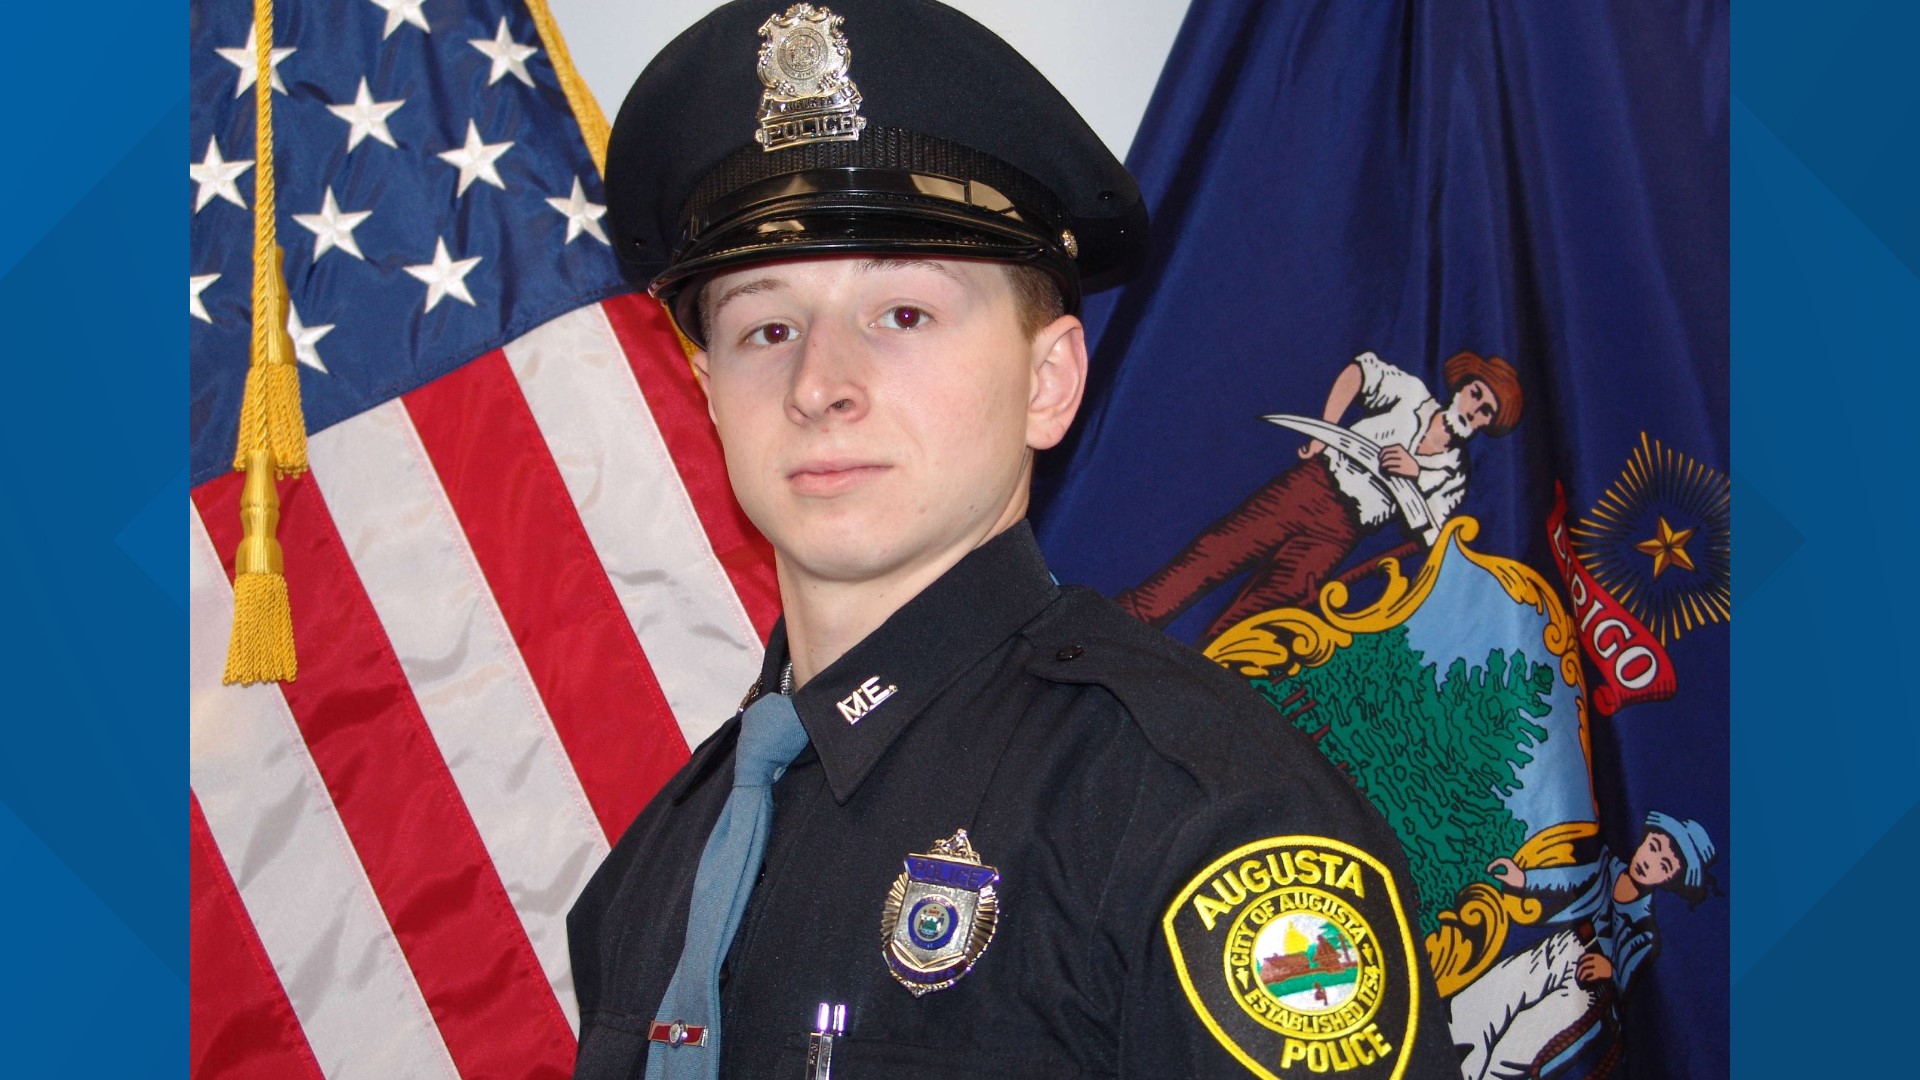 Augusta Police Officer Sebastian Guptill was placed on administrative leave.